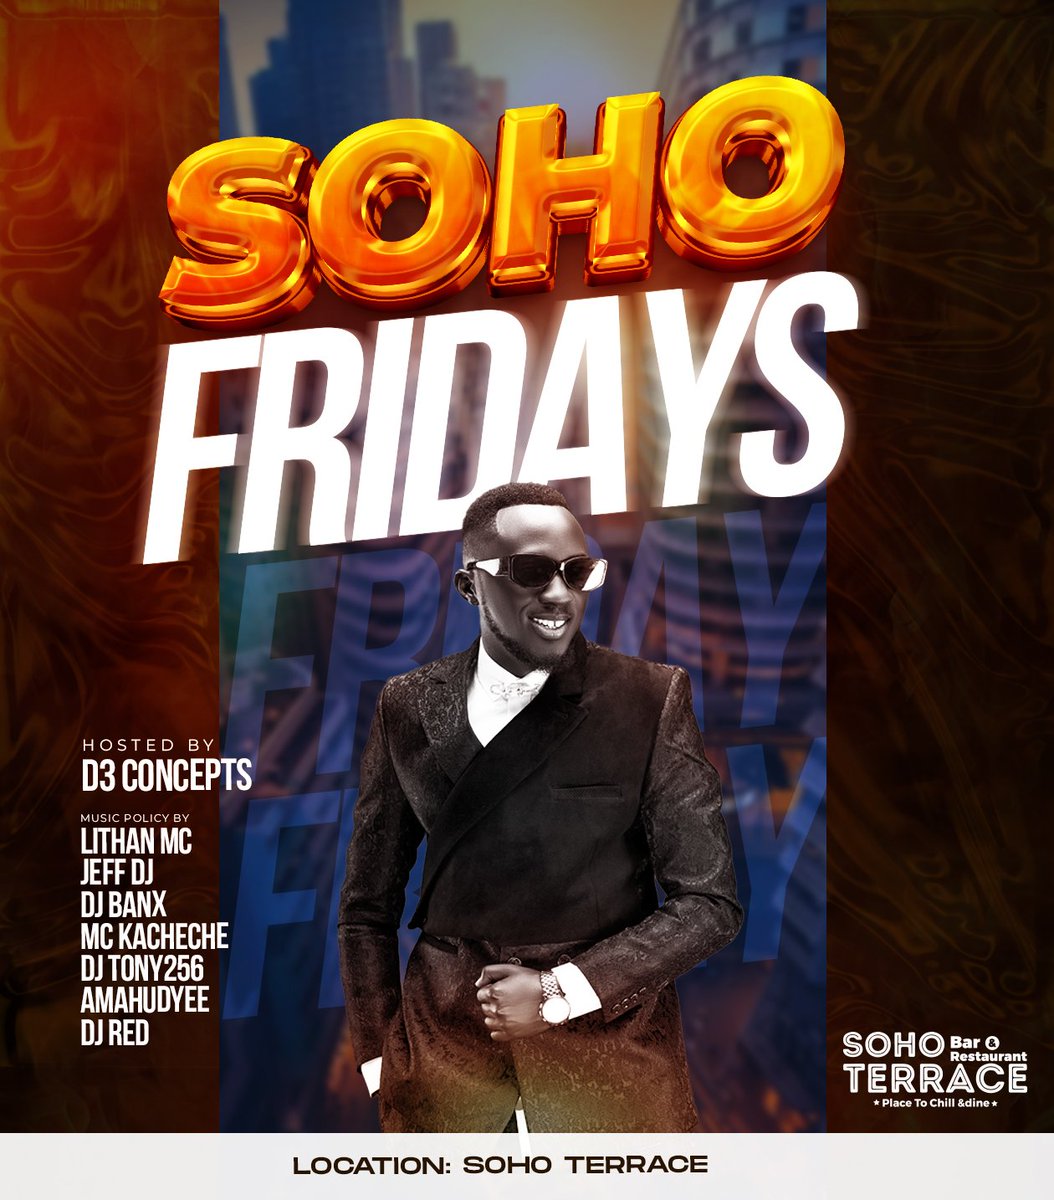 Biggest Friday party in town & we're welcoming mandem @Mc_Kacheche to the family @SoHoTerraceMbra #SohoFridays